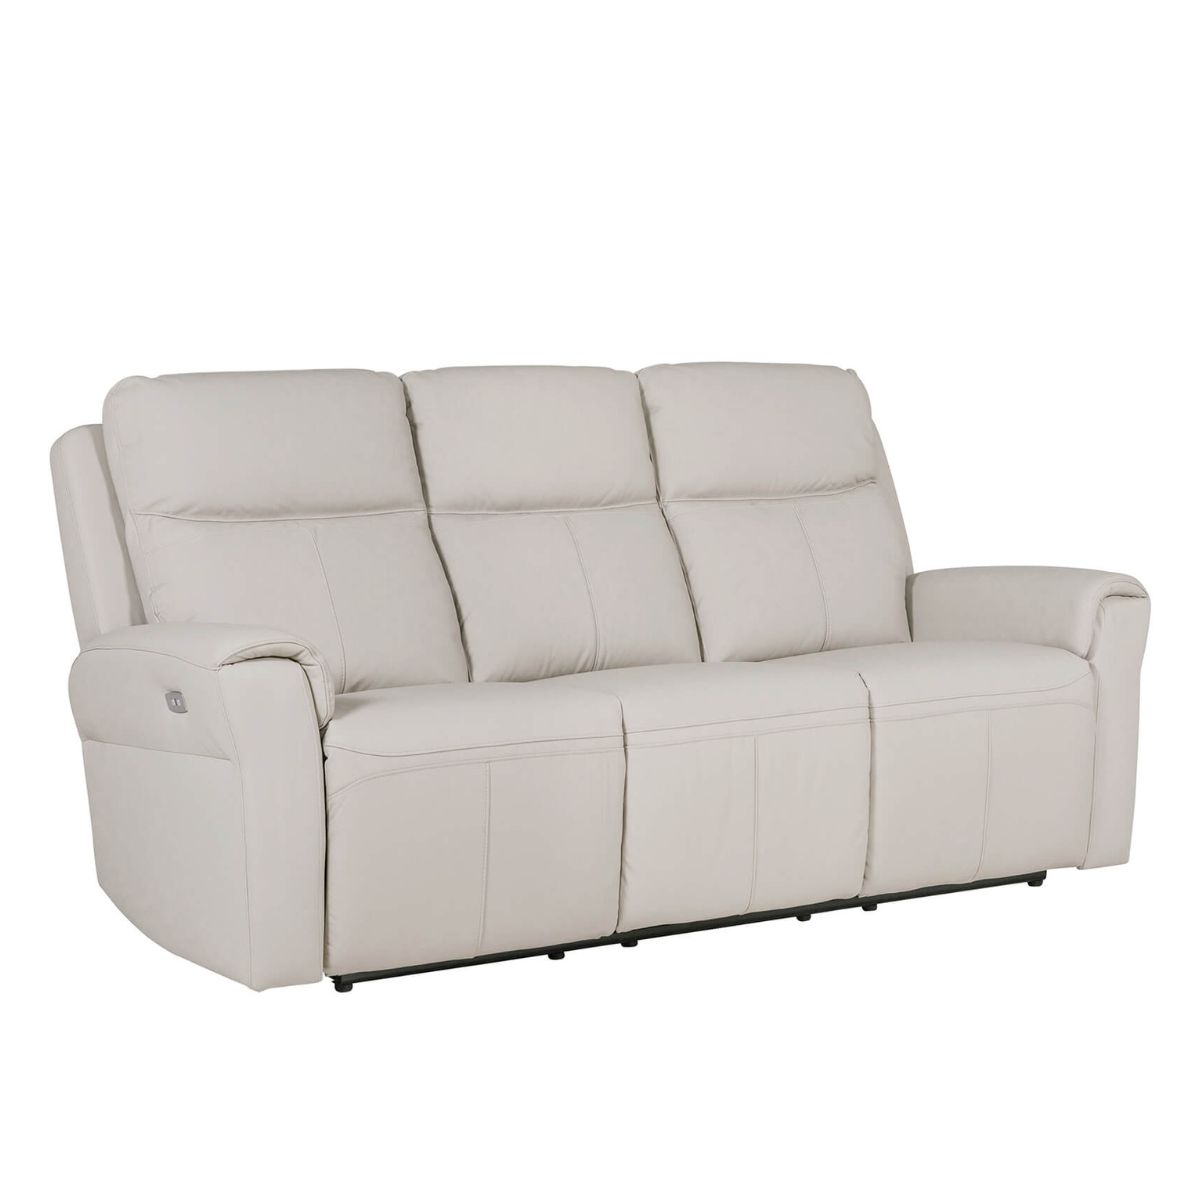 Rosslare Leather 3 Seater Electric Recliner Beige - 1